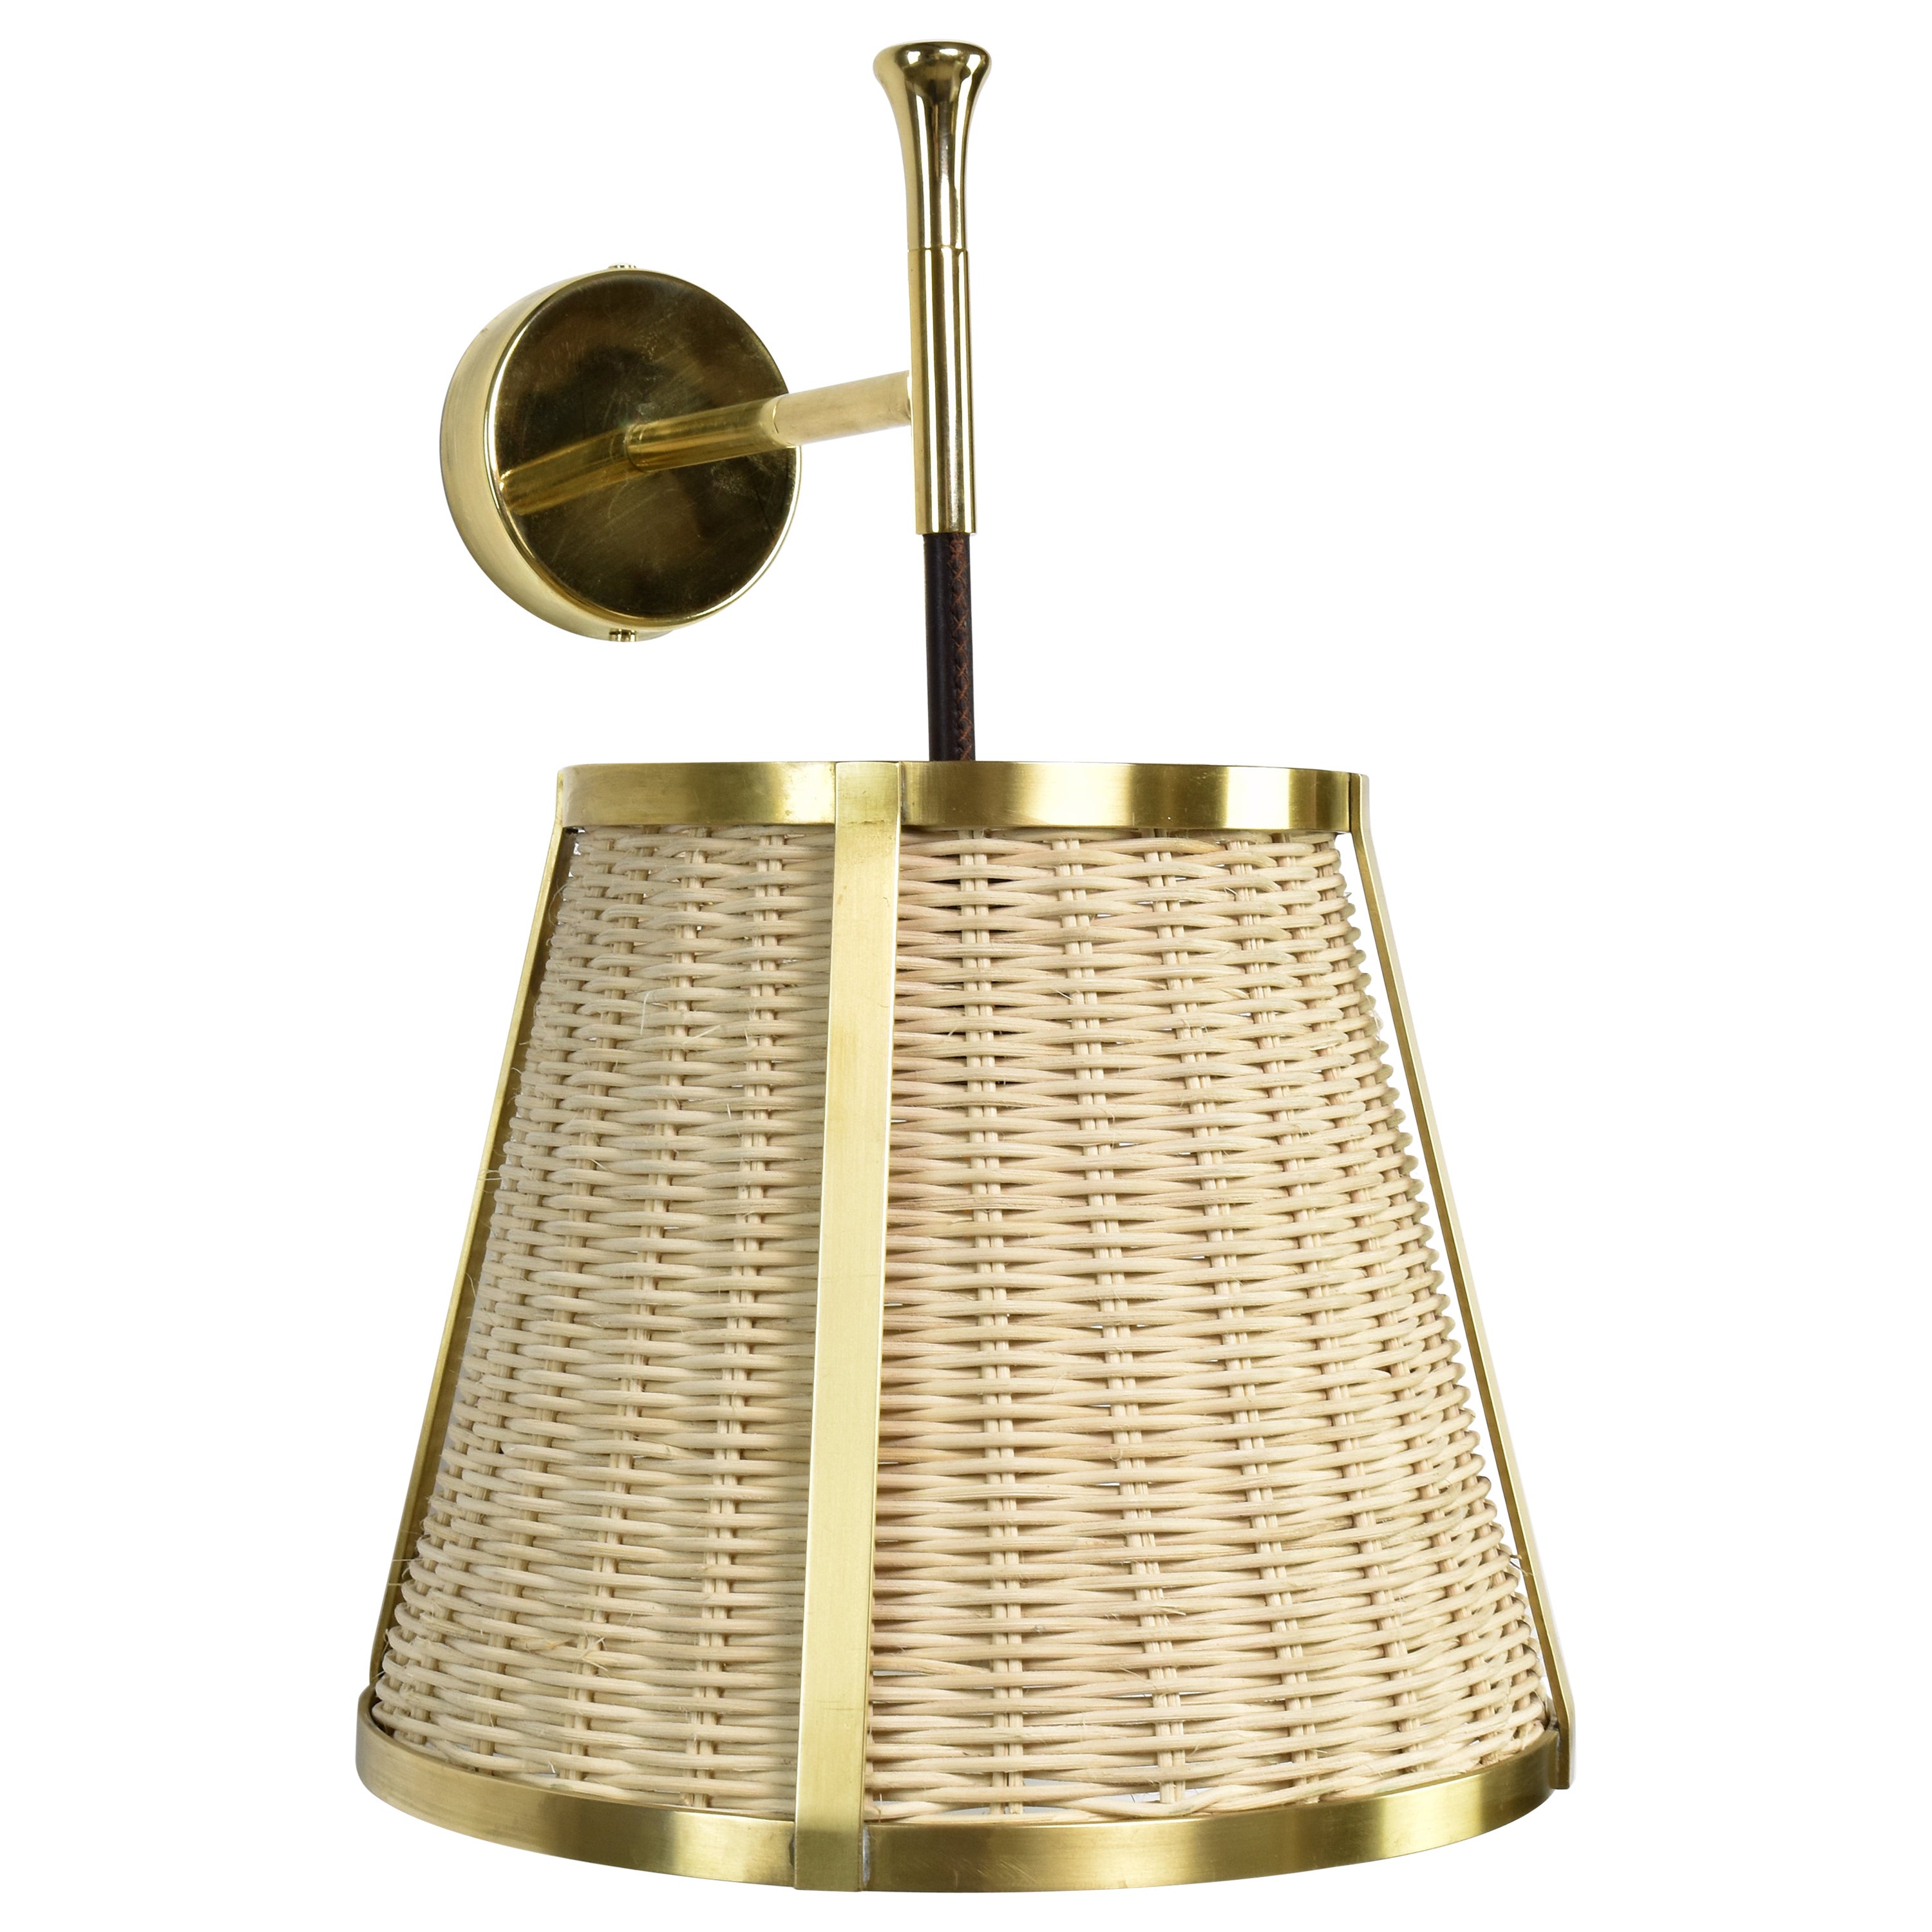 Caeli-W4 Brass and Rattan Sconce, Jas For Sale